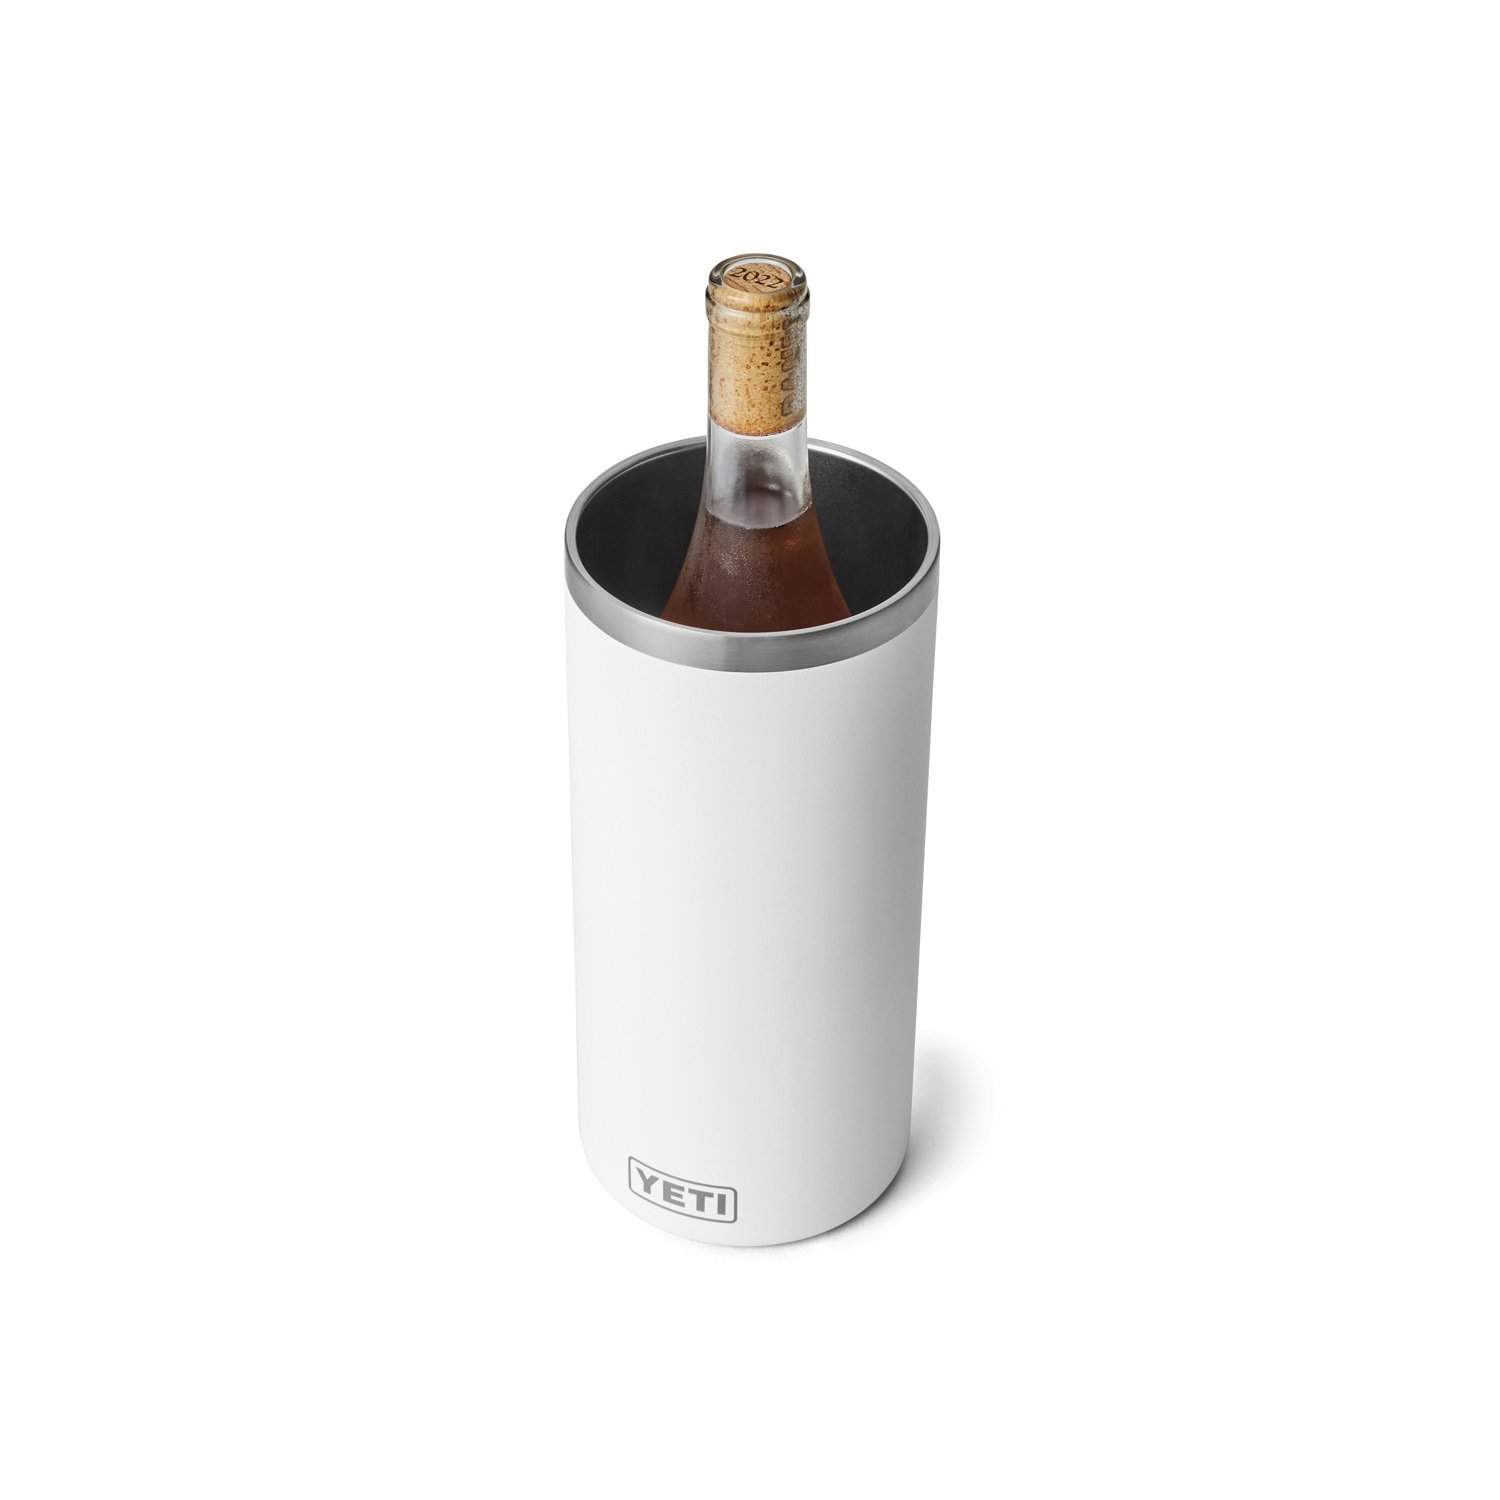 https://academy.scene7.com/is/image/academy//drinkware/yeti-rambler-wine-chiller-21071502395-white/ac59b5e77618417f95dcea4fd9823915?$pdp-mobile-gallery-ng$